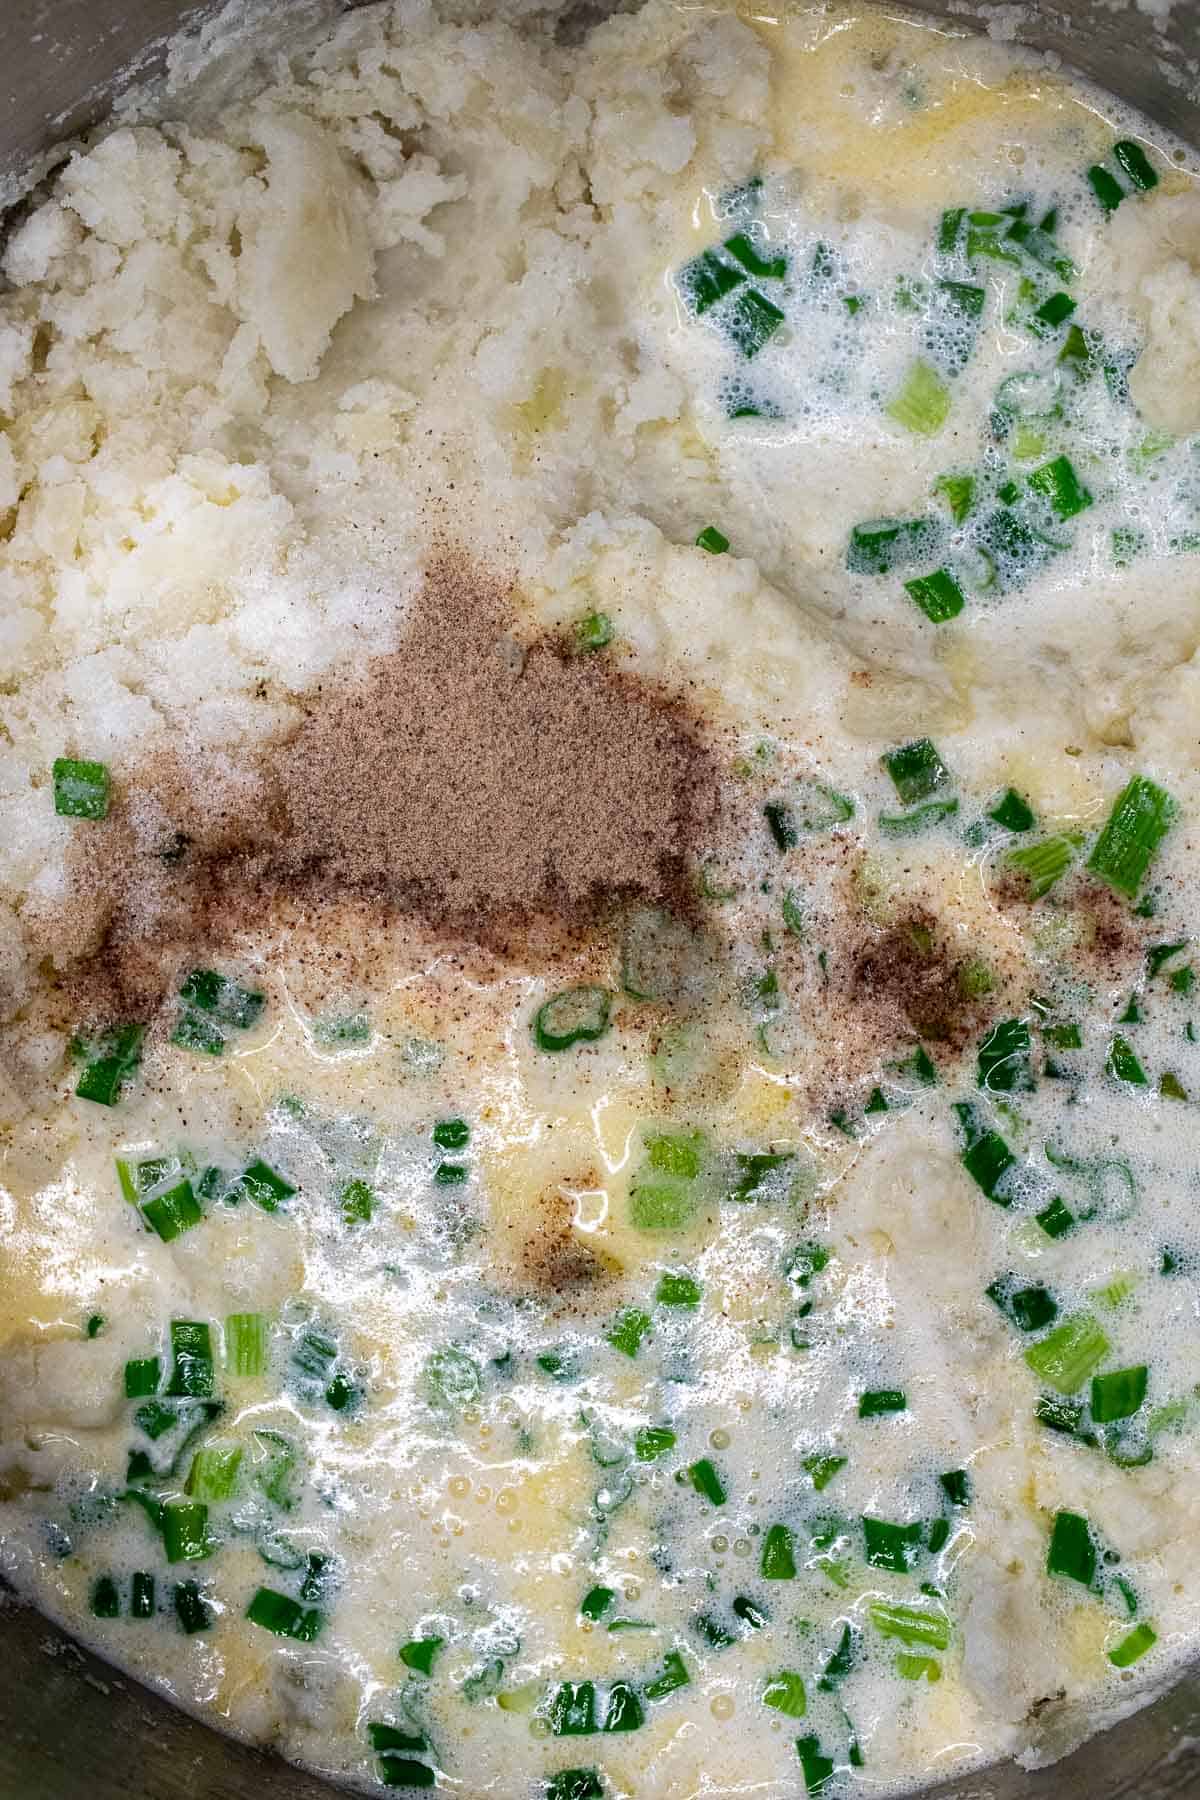 Salt, pepper, and scallion milk mixture added to mashed potatoes.